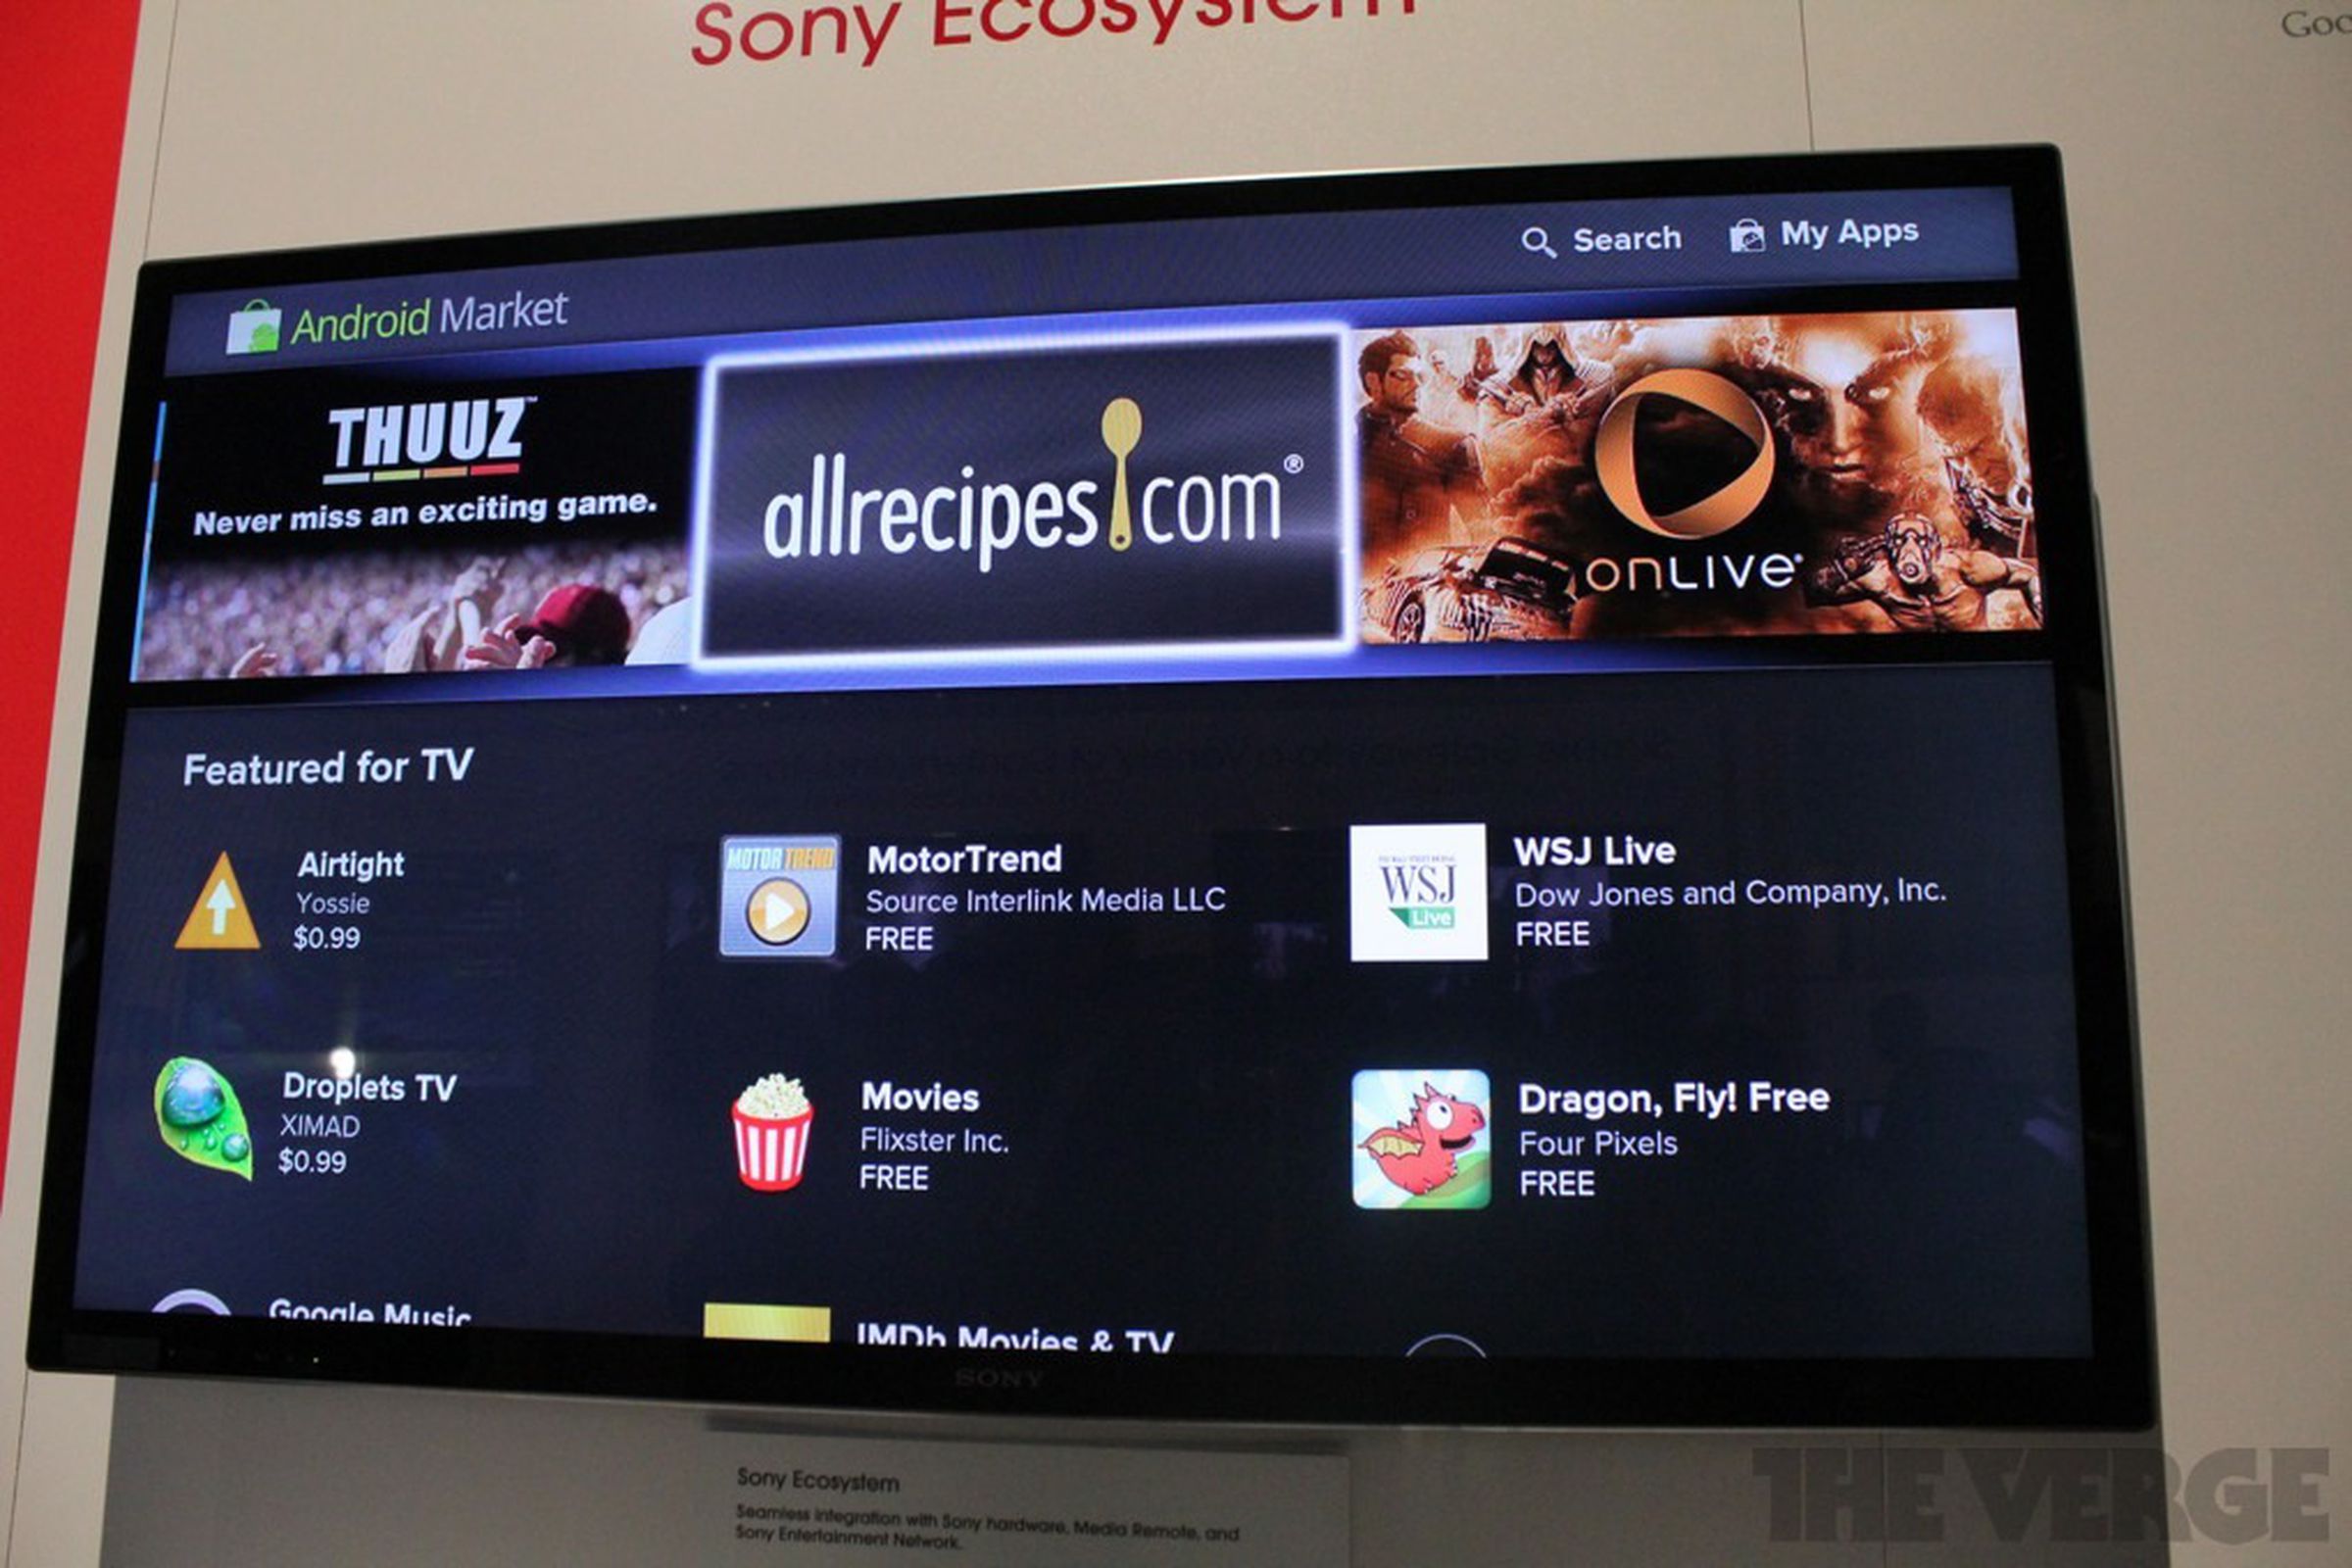 Gallery Photo: Google TV 2.0 user interface hands-on pictures